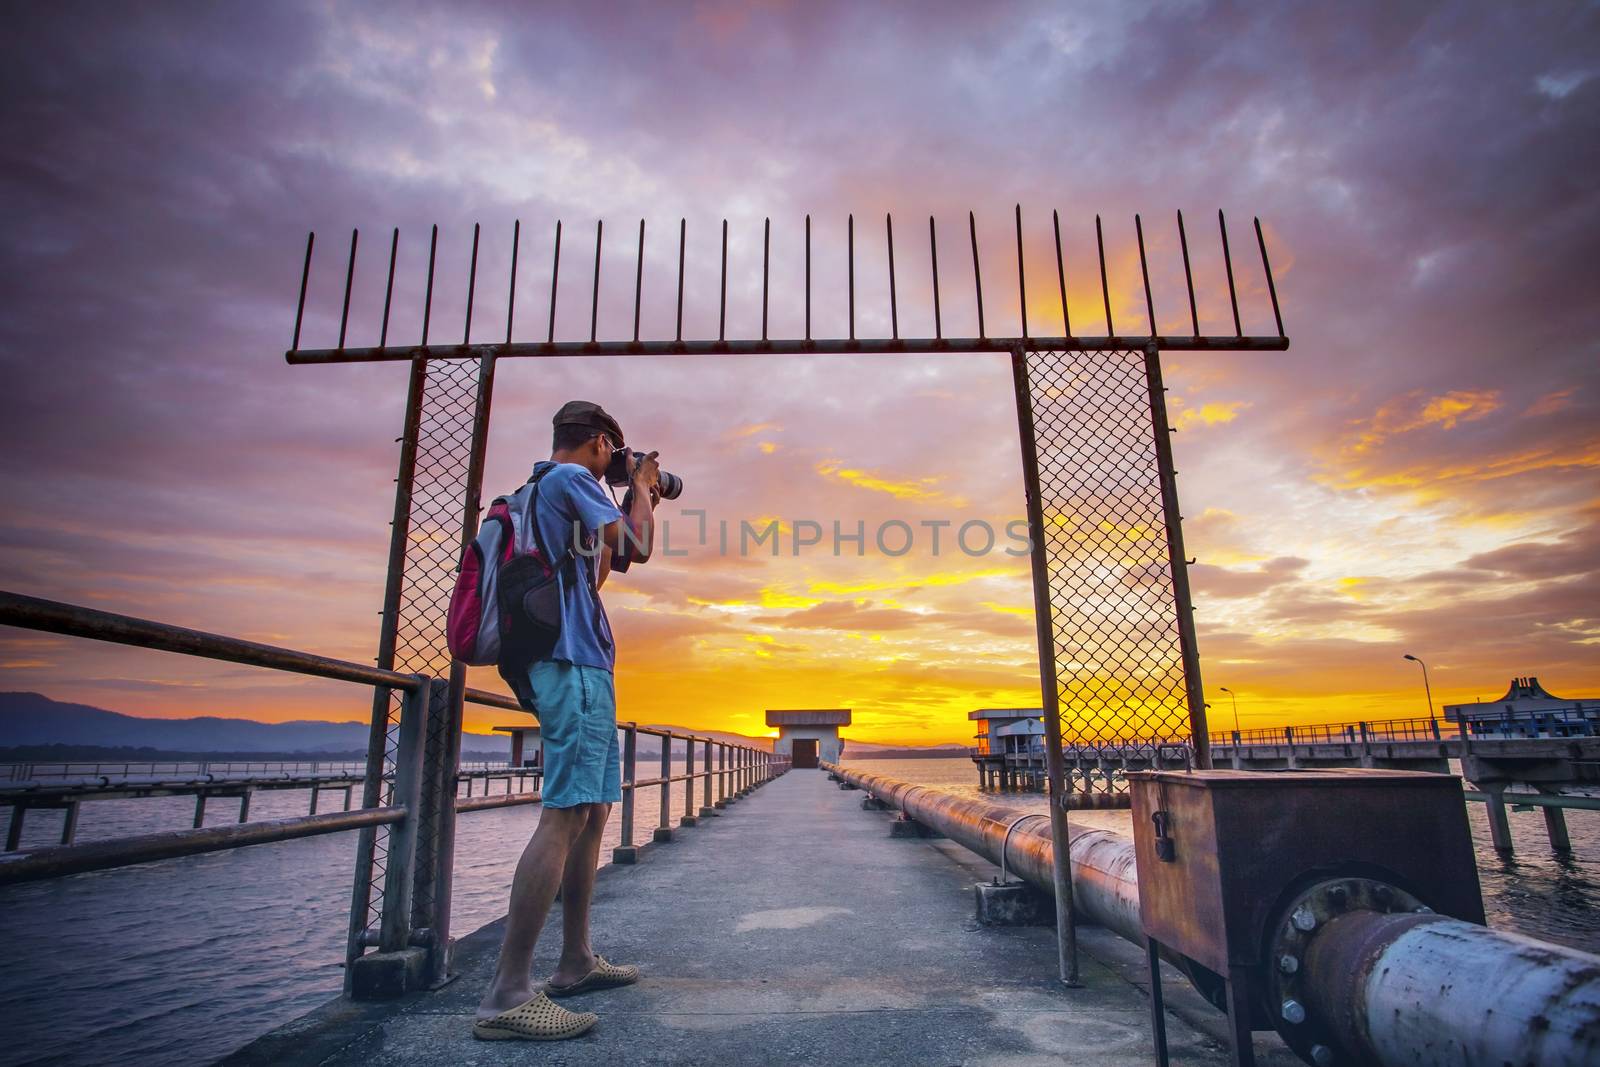 photographer taking a photograph  at water work station  and sun rising sky background